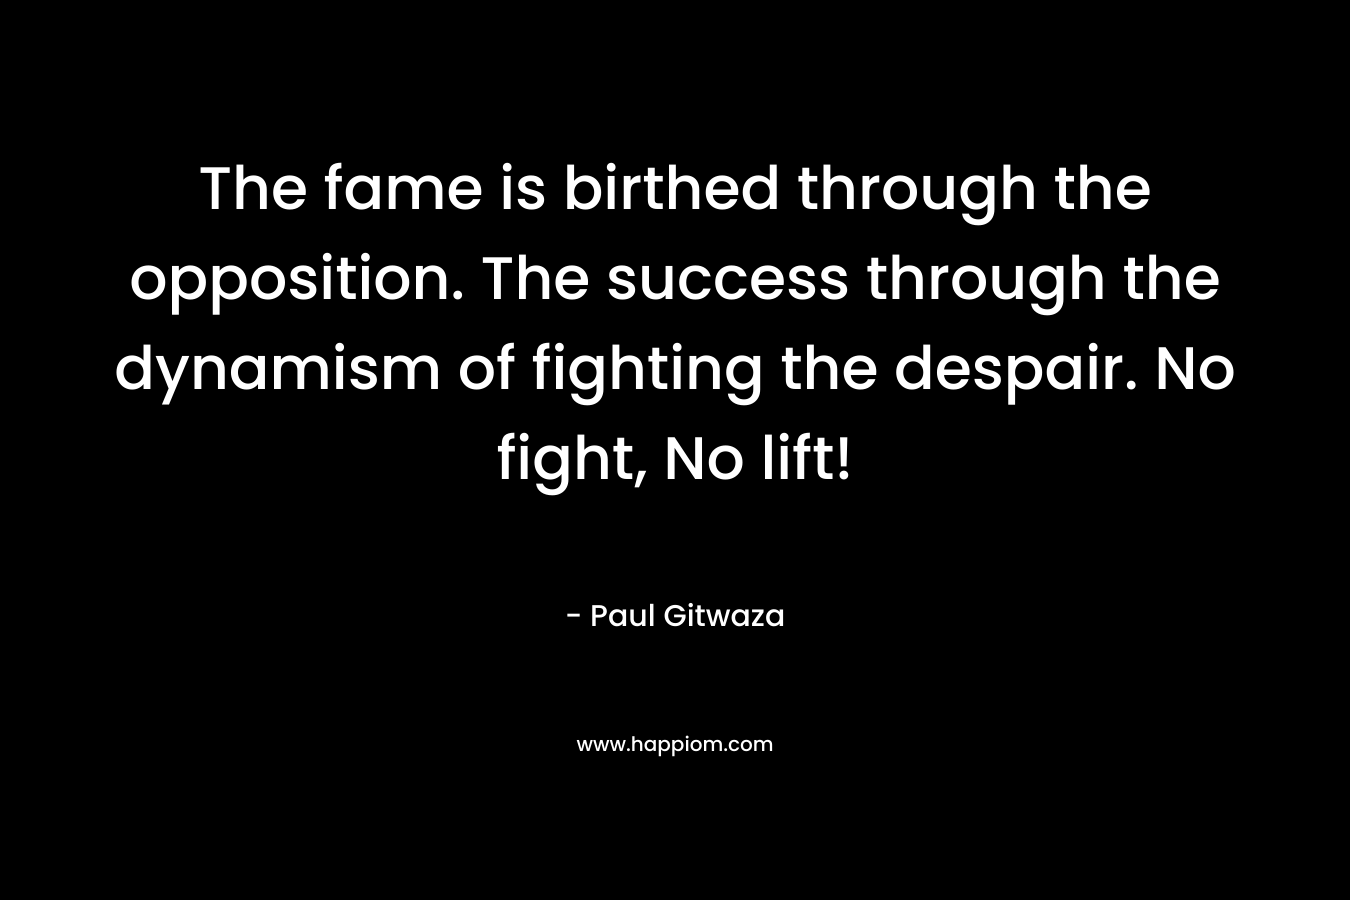 The fame is birthed through the opposition. The success through the dynamism of fighting the despair. No fight, No lift! – Paul Gitwaza